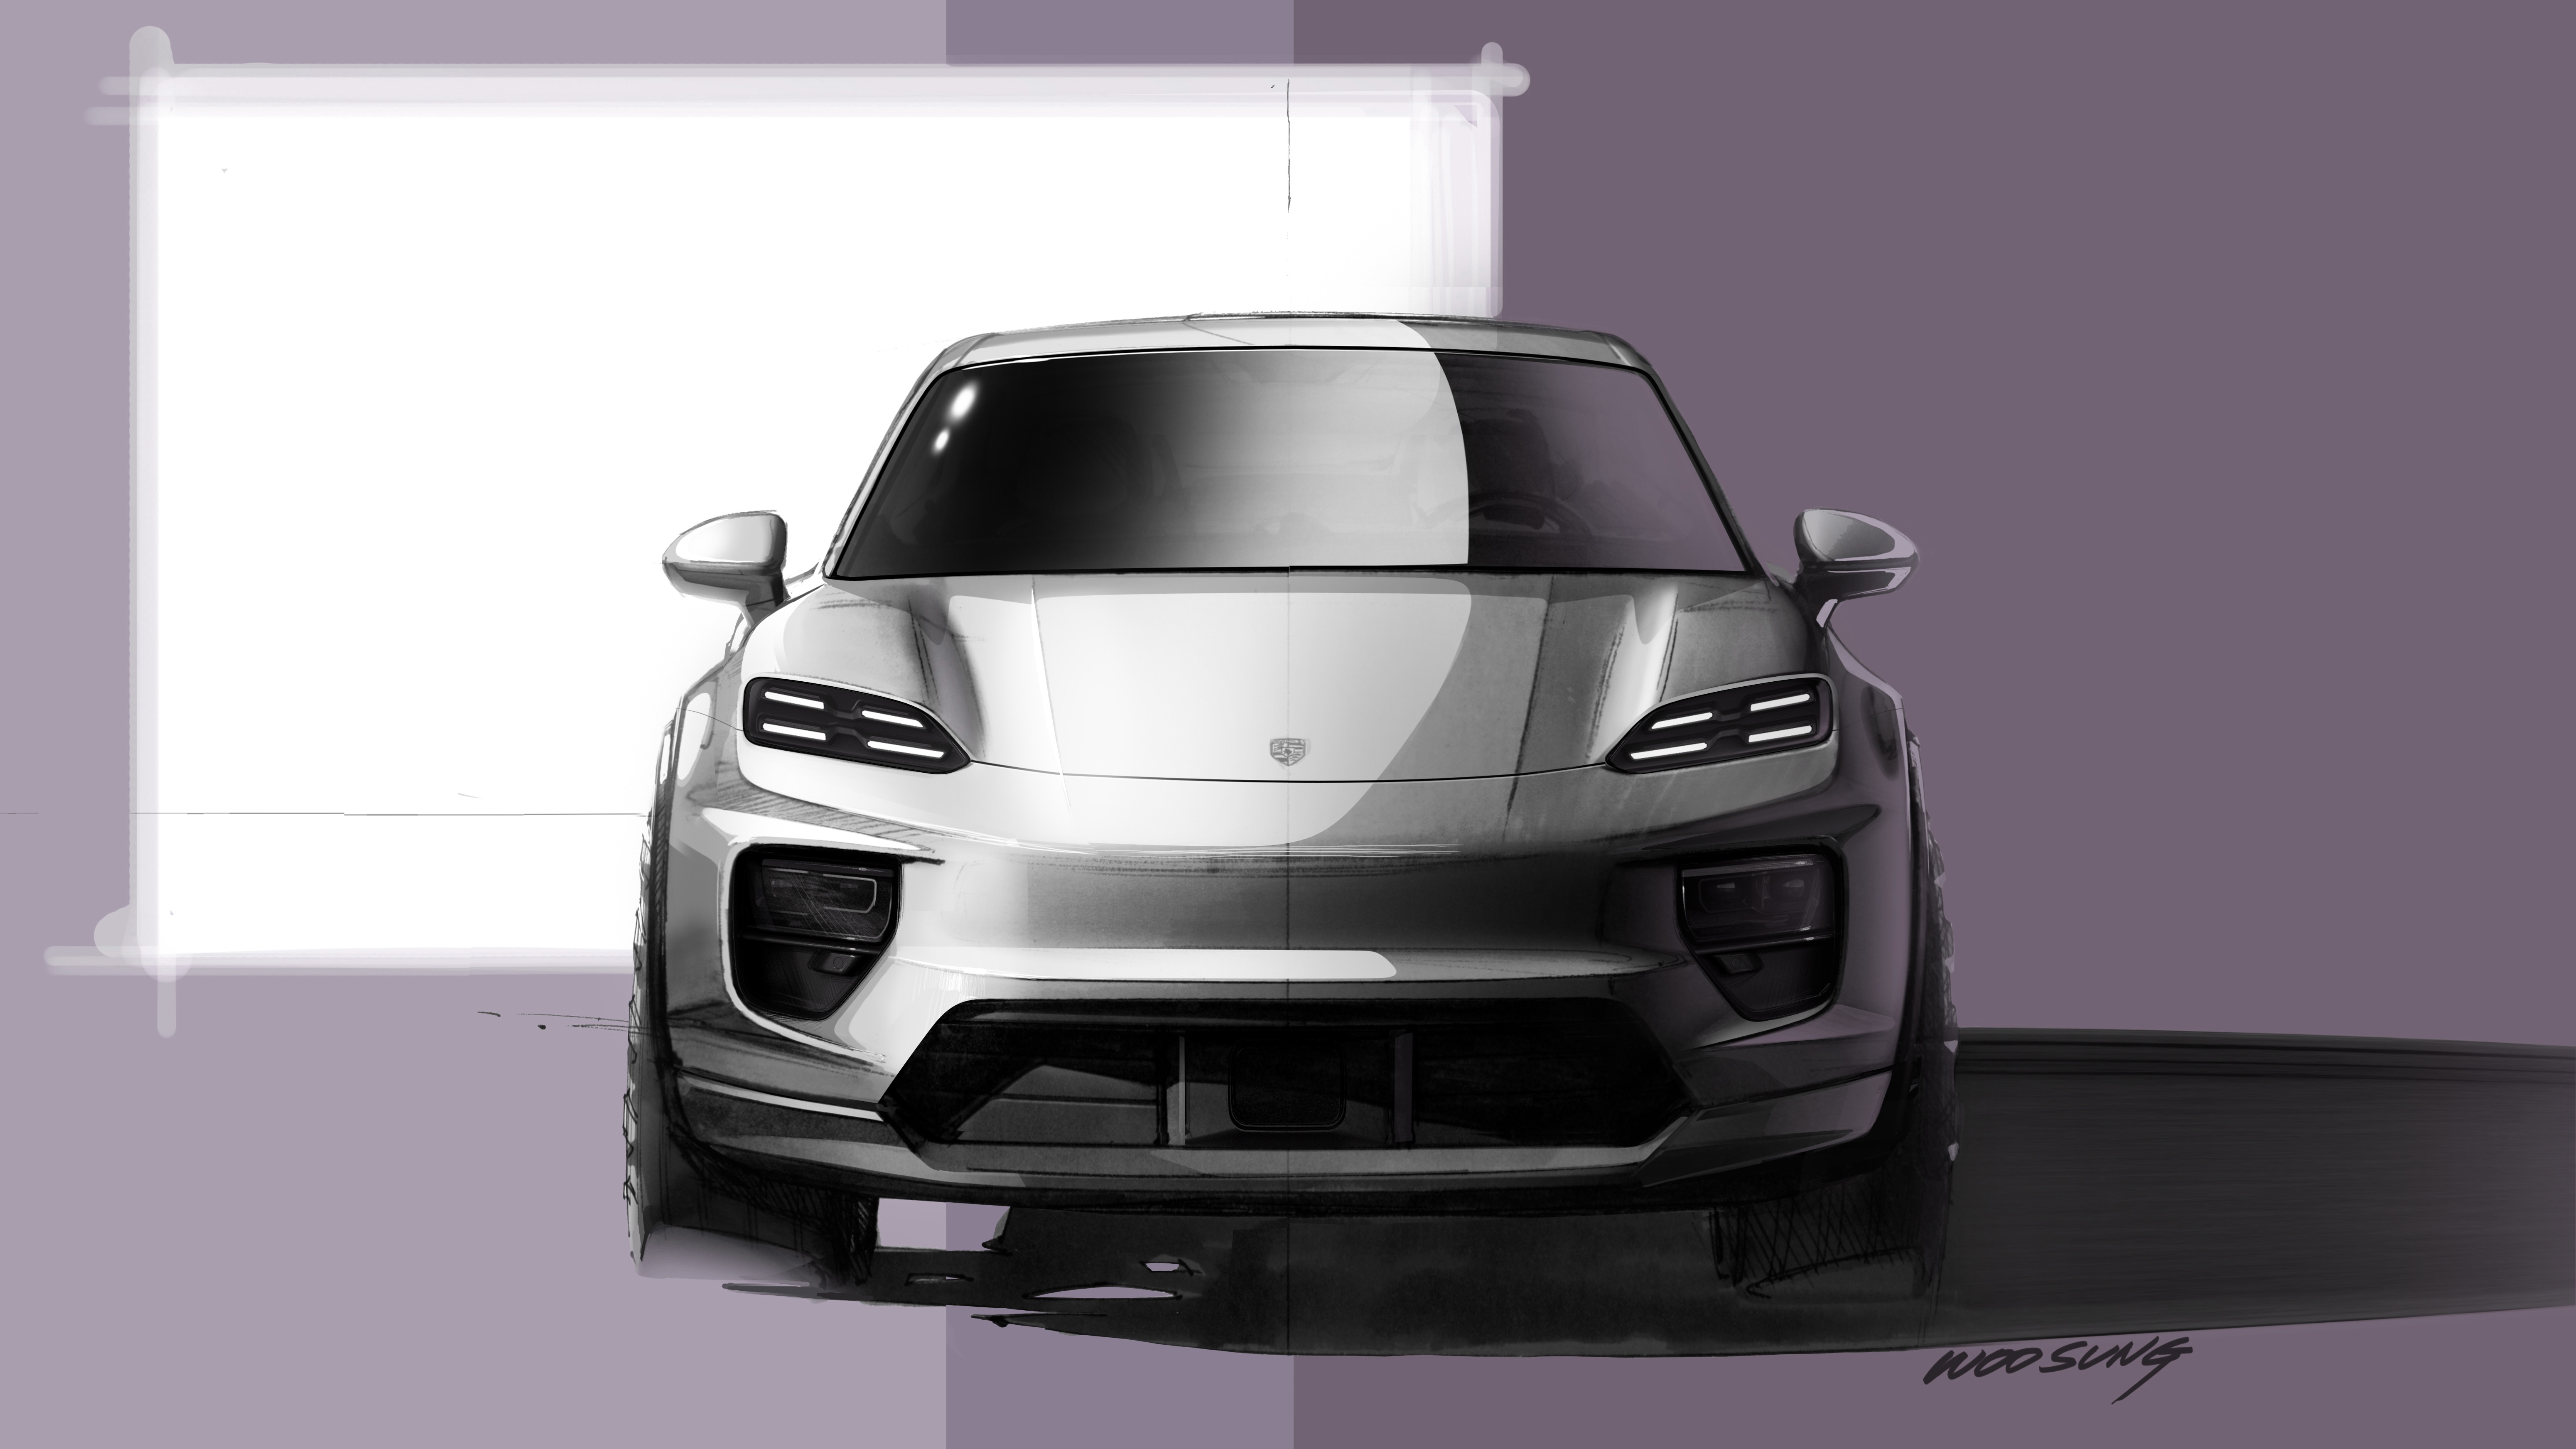 Sketch drawing of front of electric Porsche Macan